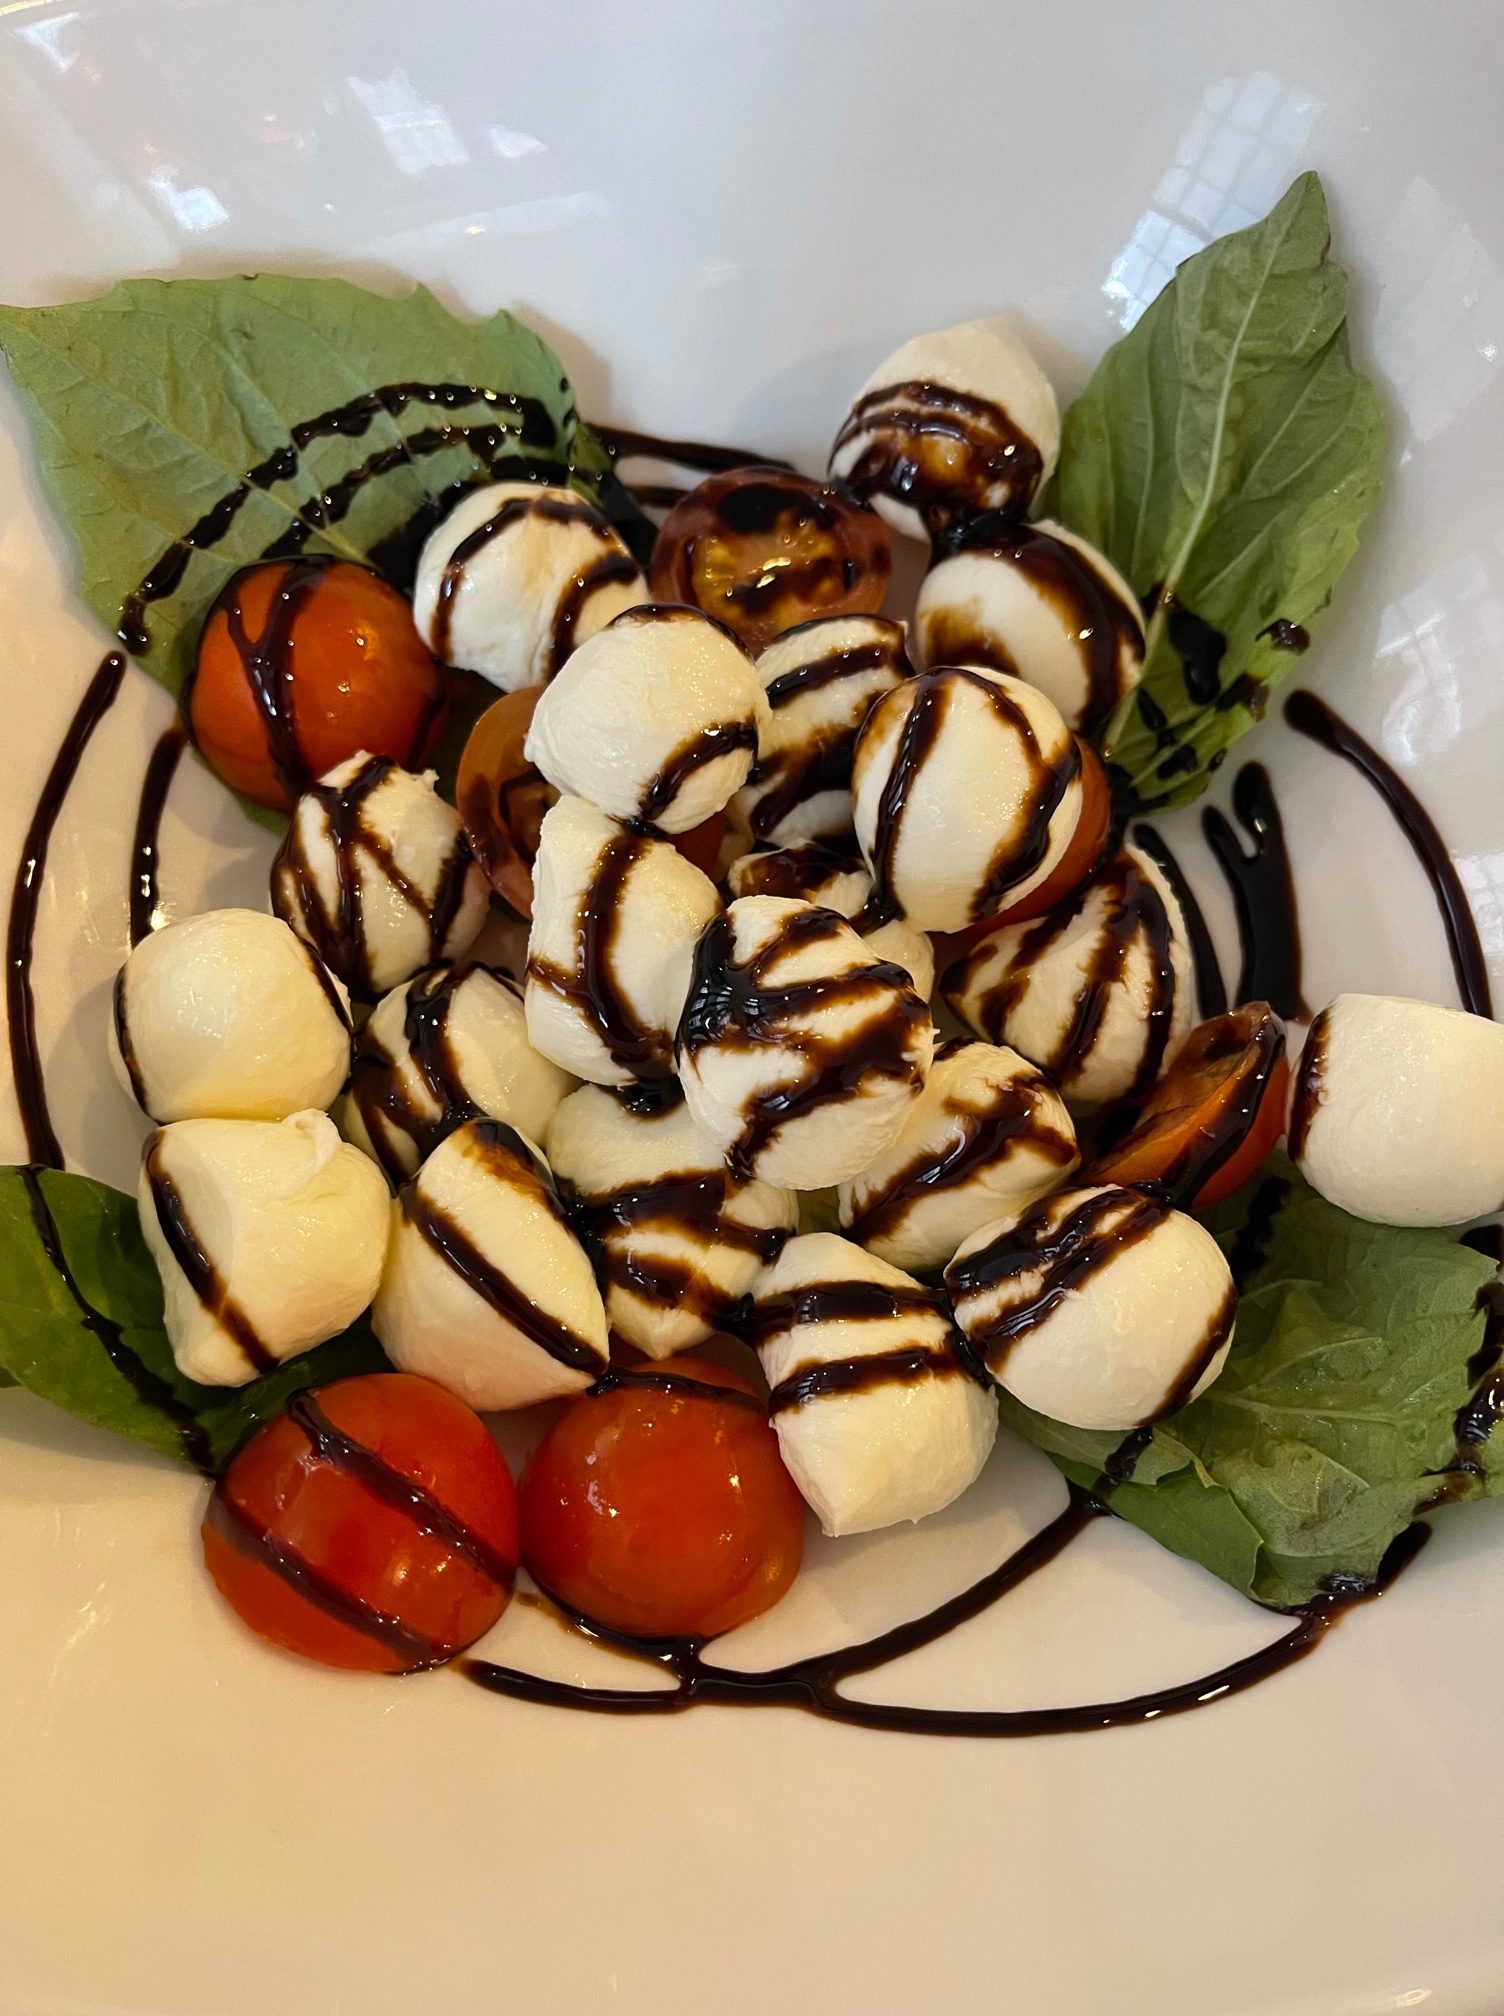 On a white plate, there is a Caprese salad with red tomatoes, mini balls of mozz, and a thick pretty drizzle of balsamic. Photo by Stephanie Wheatley.